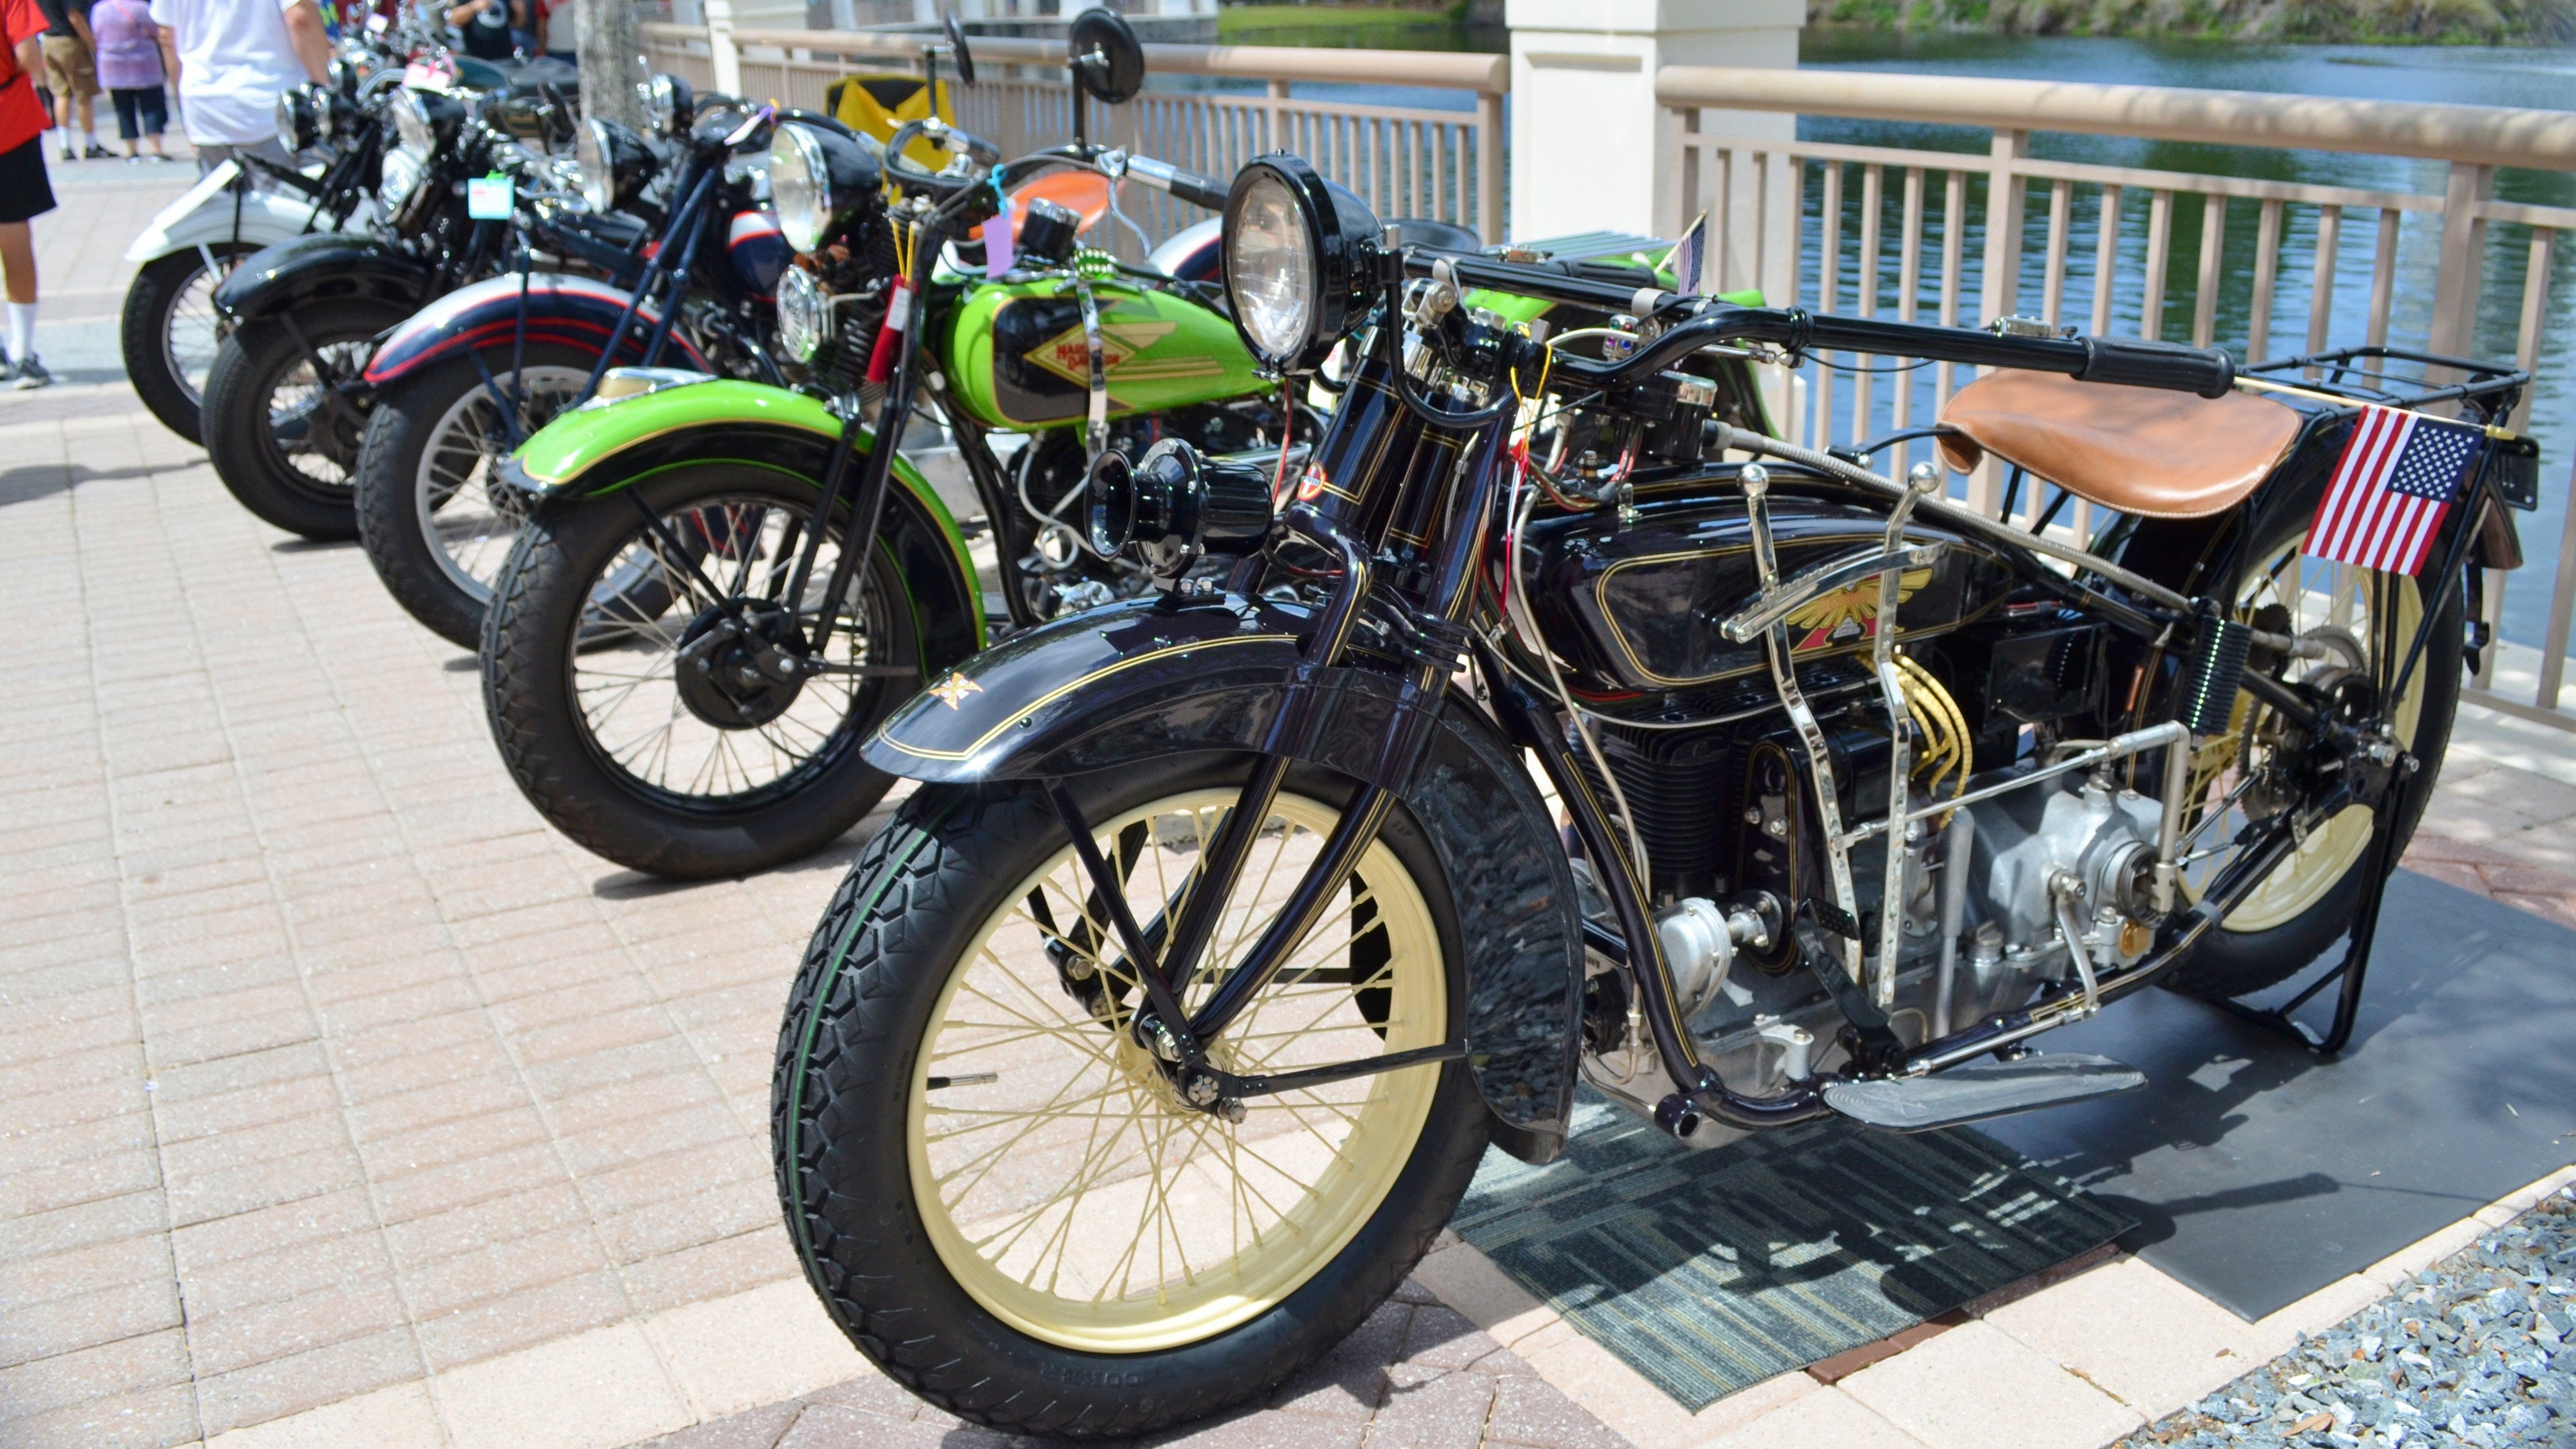 Classic motorcycle show makes 22nd appearance at World Golf Village